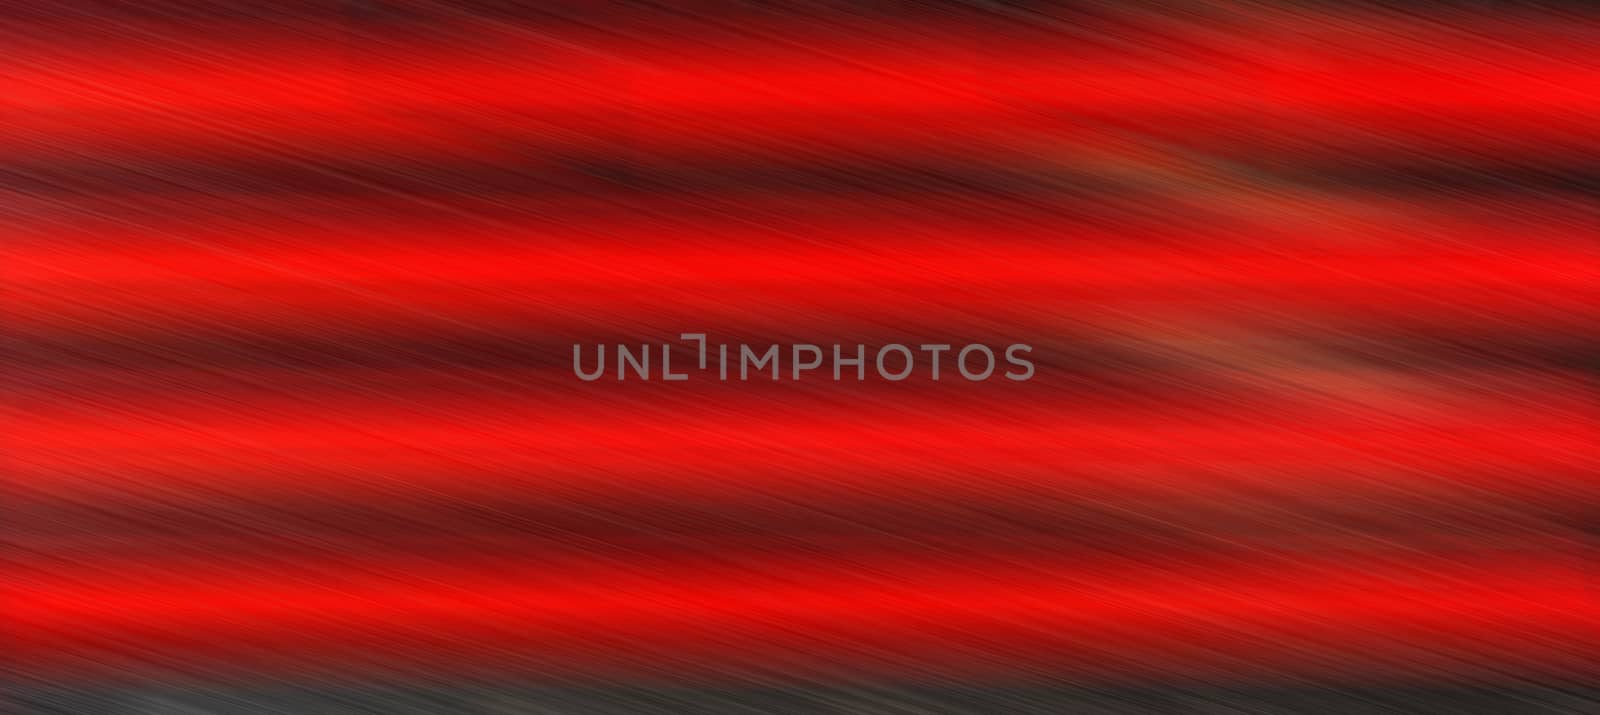 Background abstract design by TravisPhotoWorks